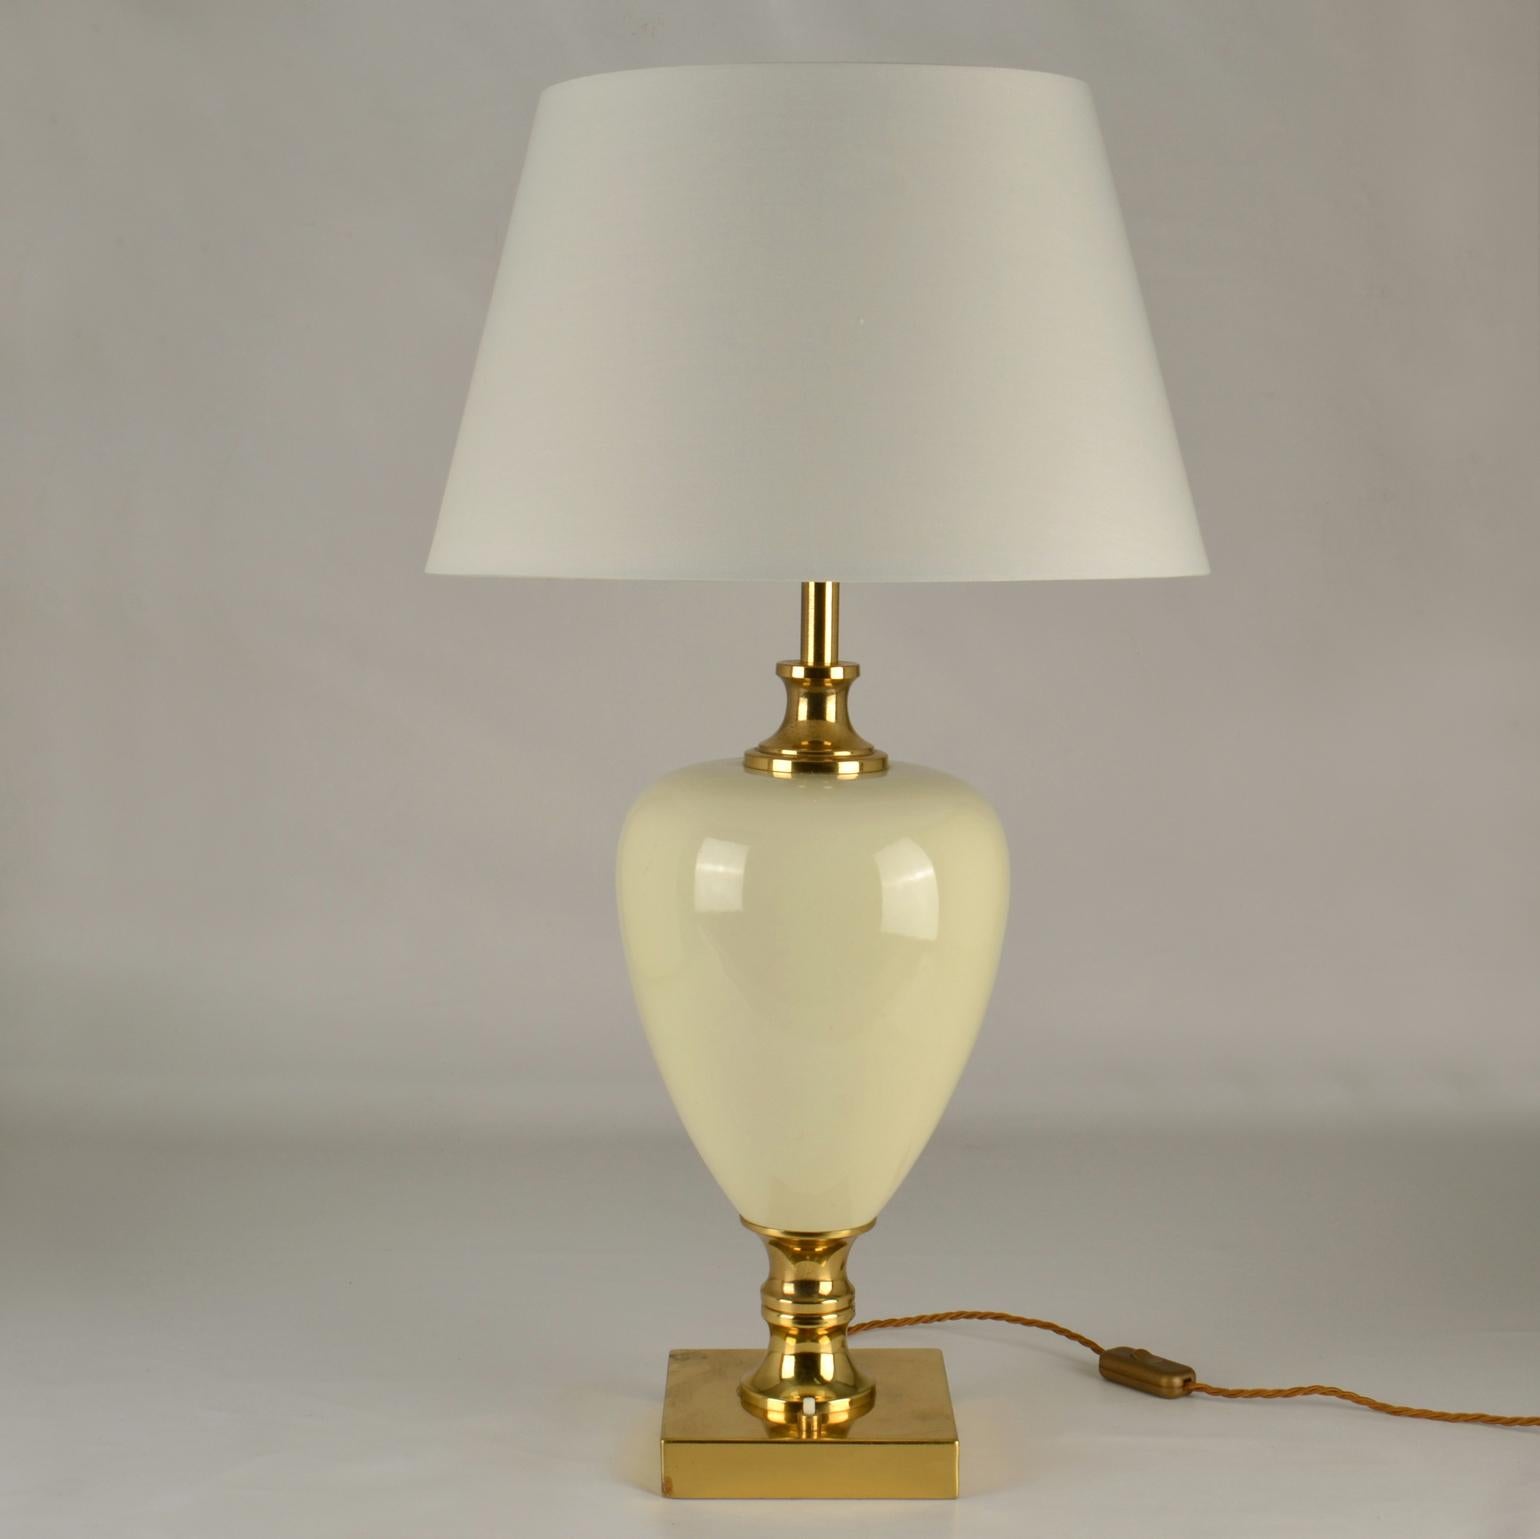 Pair of Cream Porcelain and Brass Table Lamps by Zonca, Italy, 1970s For Sale 4